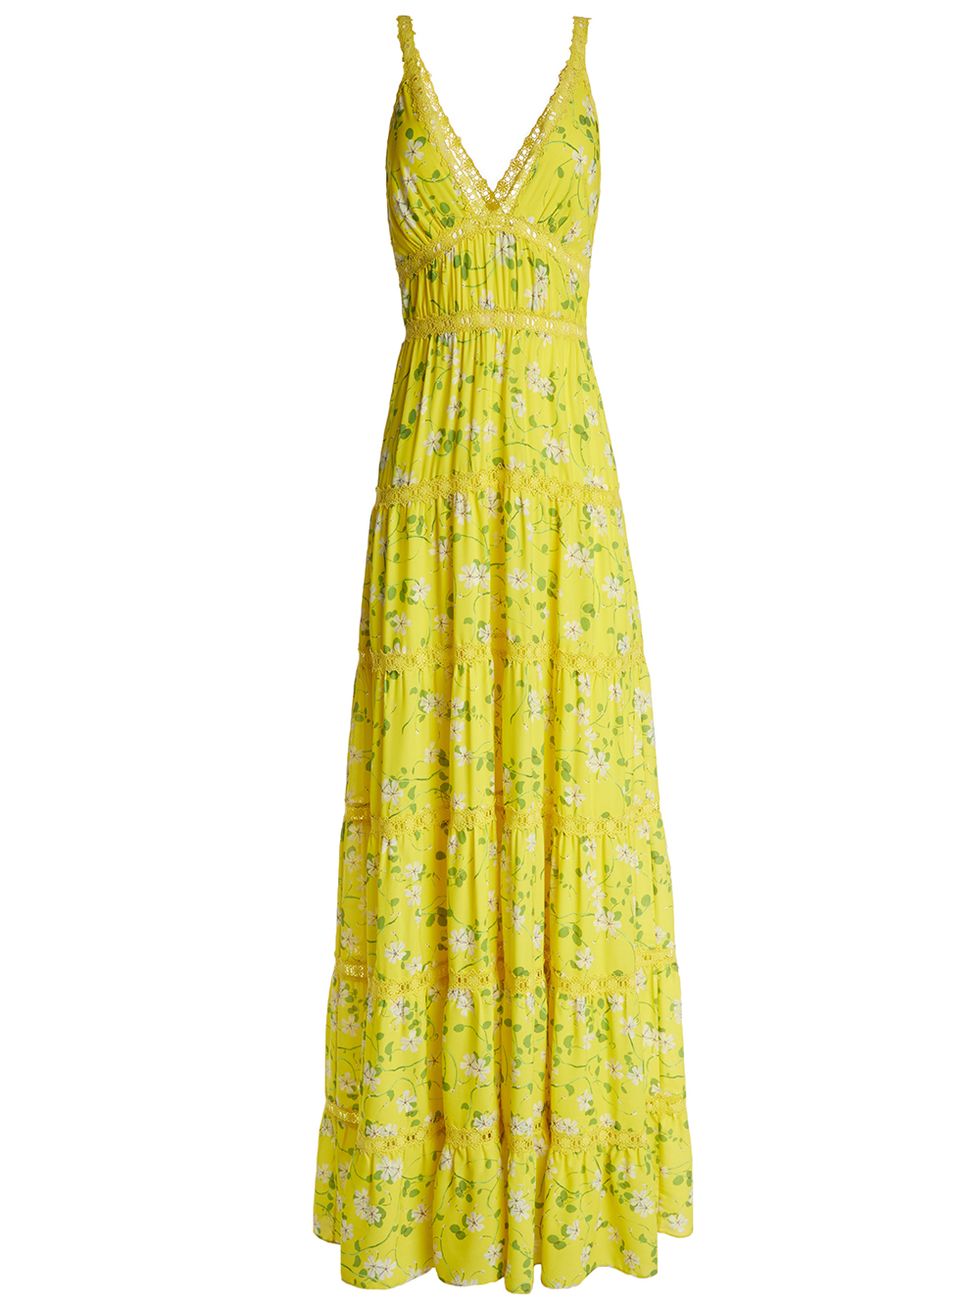 Clothing, Dress, Day dress, Yellow, Gown, One-piece garment, Cocktail dress, Cover-up, Neck, A-line, 